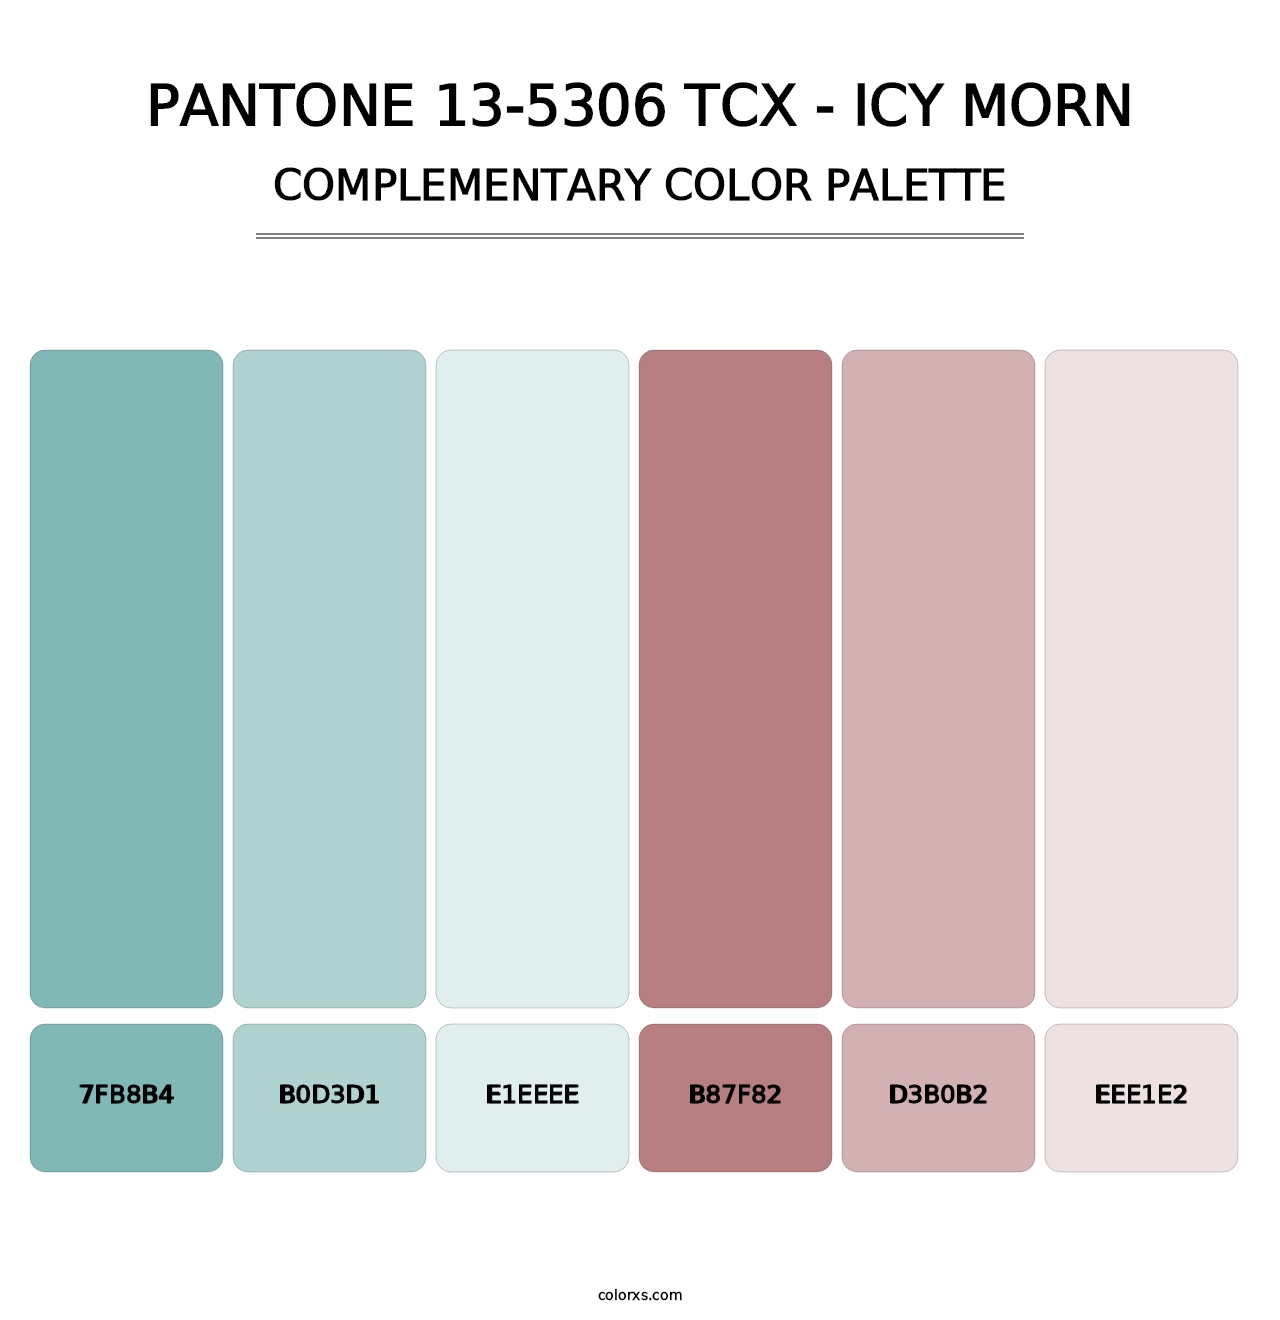 PANTONE 13-5306 TCX - Icy Morn - Complementary Color Palette